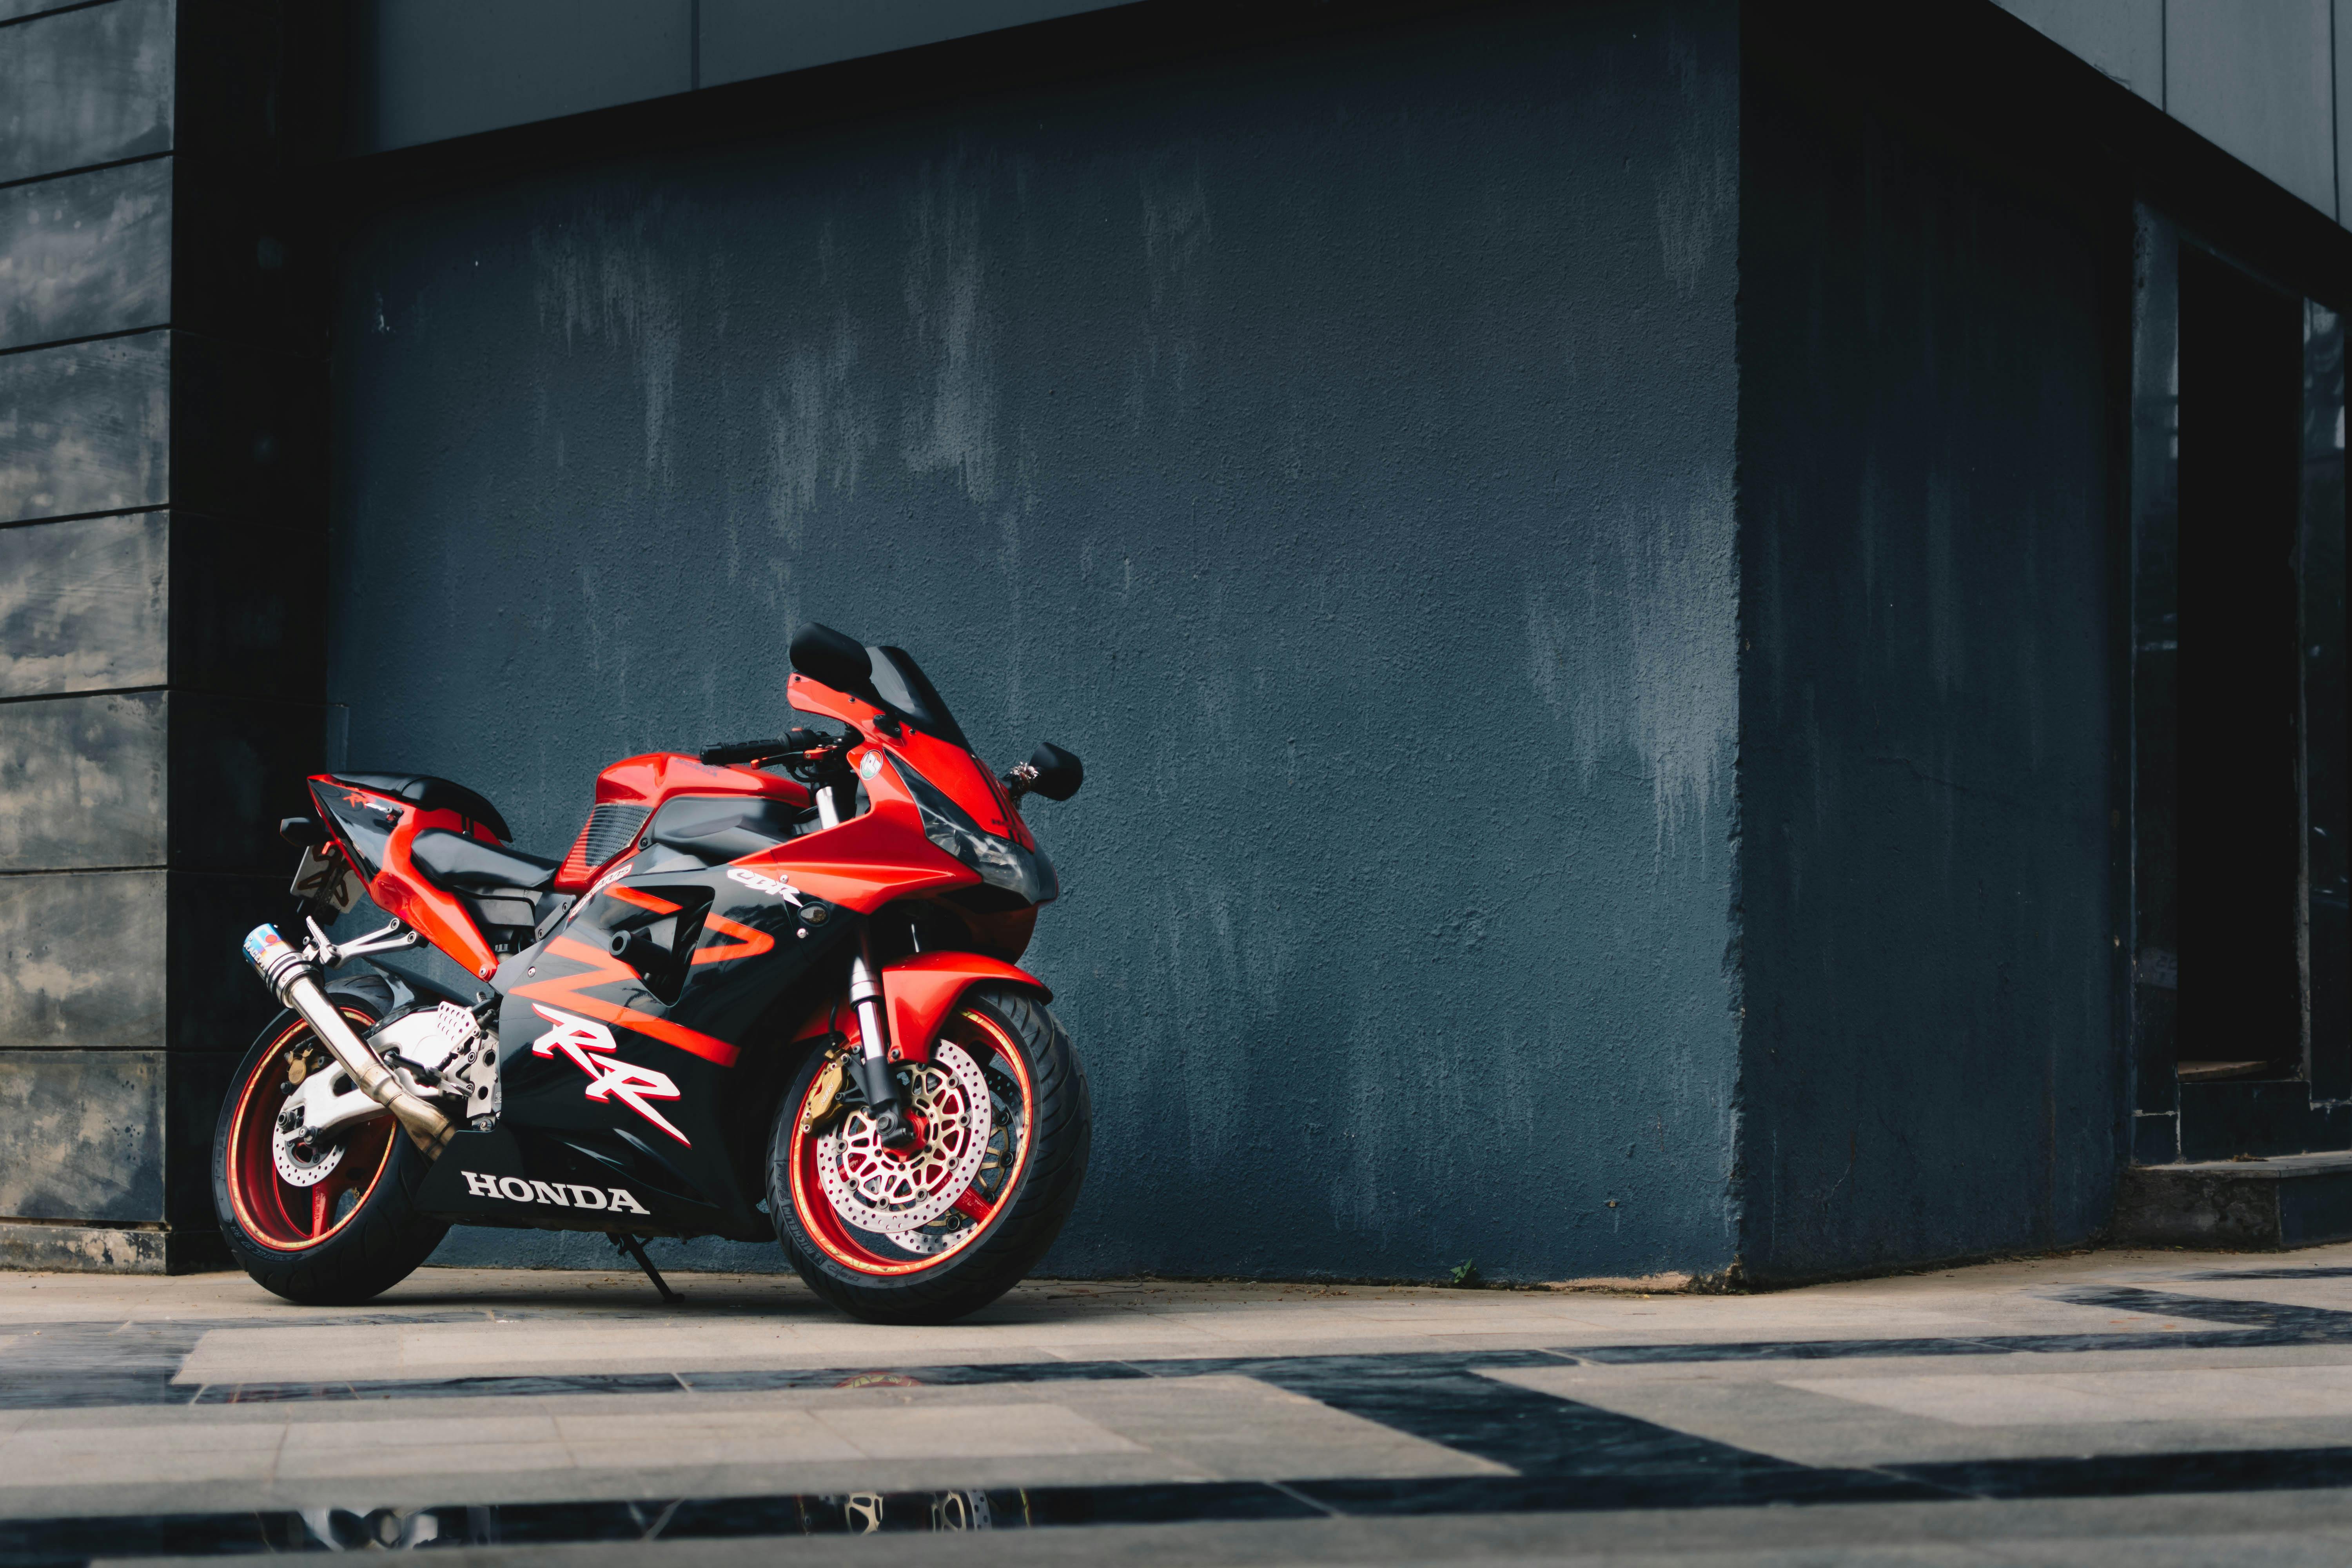 Photo Of Red And Black Honda Sport Bike Parked Next To Black Wall